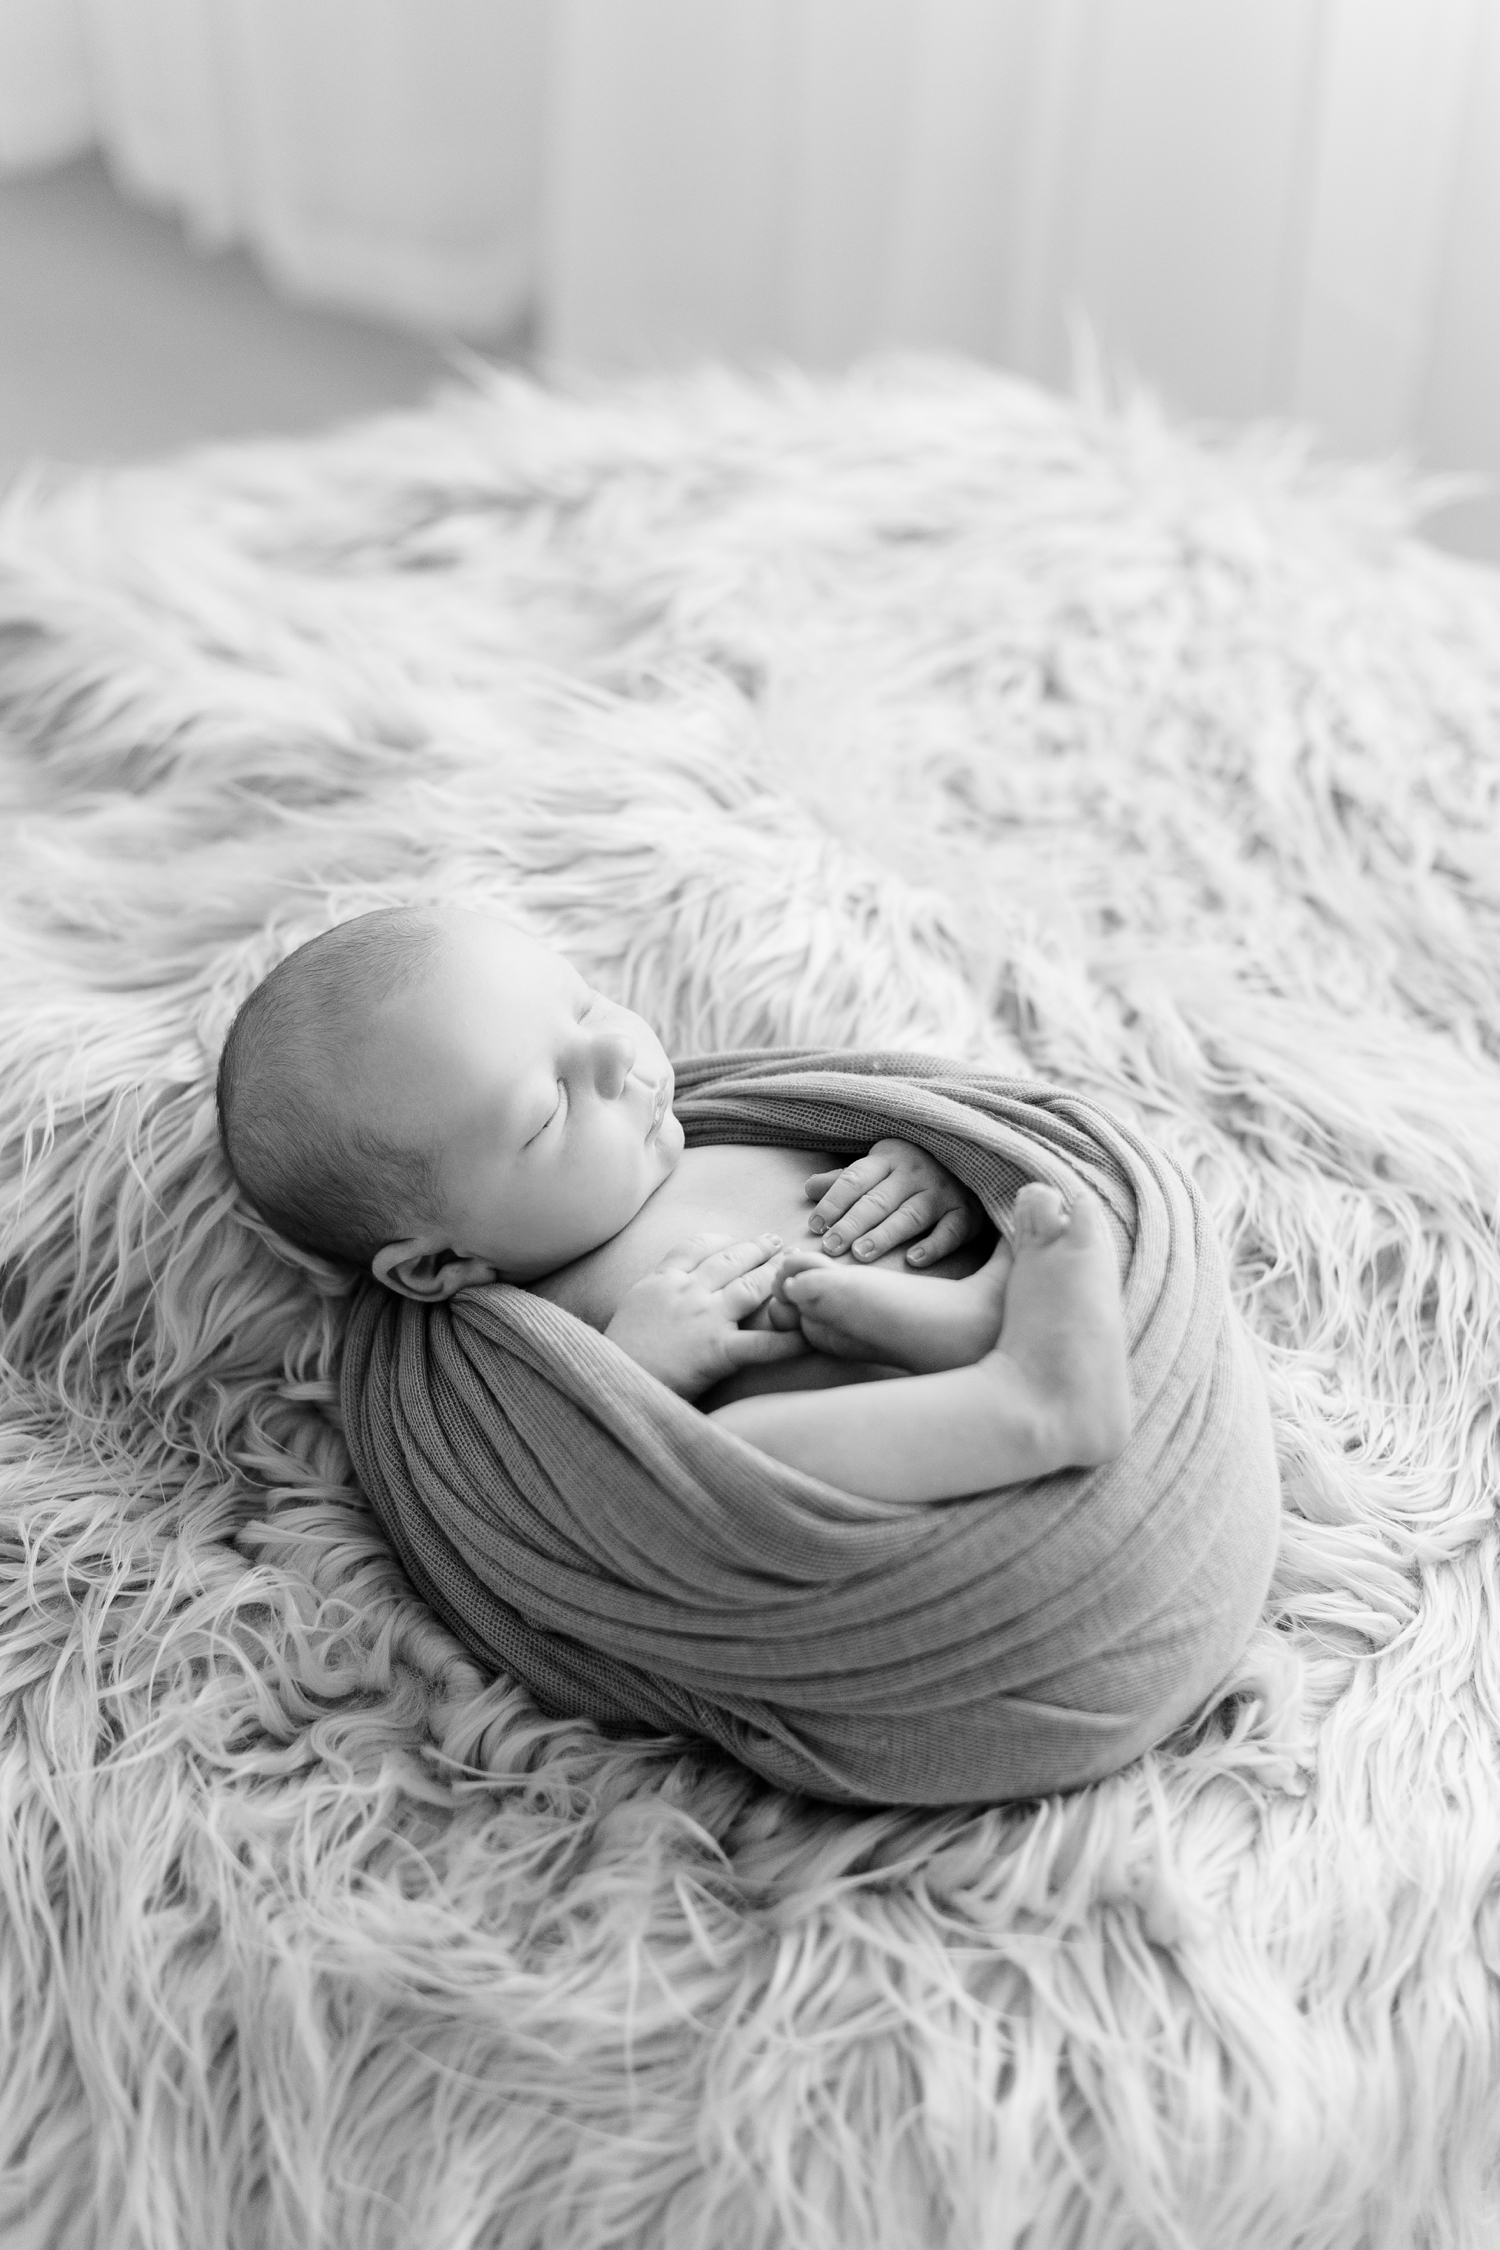 Baby Levi wrapped up in a swaddled laying on a flotaki rug with white curtains draped in the background | CB Studio